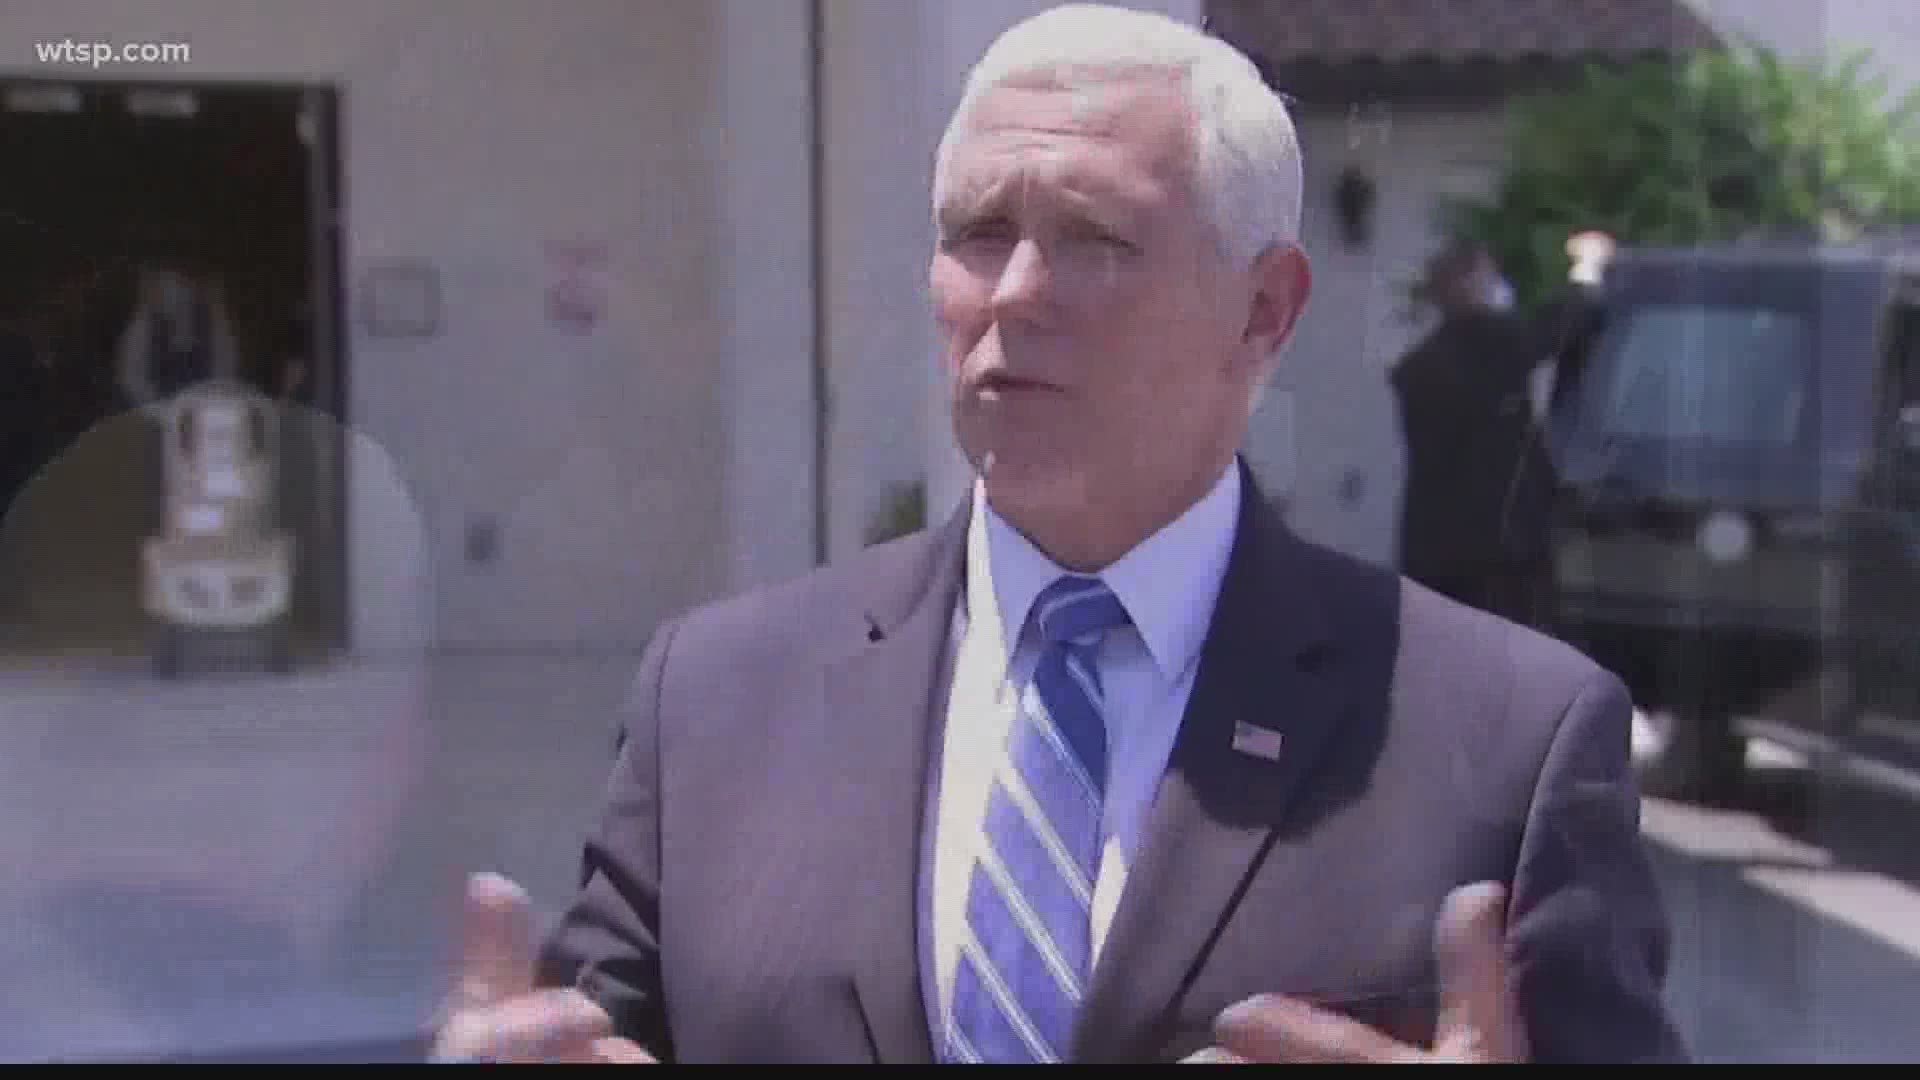 Pence visited a local nursing home before gathering with tourism leaders to discuss the future of Florida’s hospitality industry.